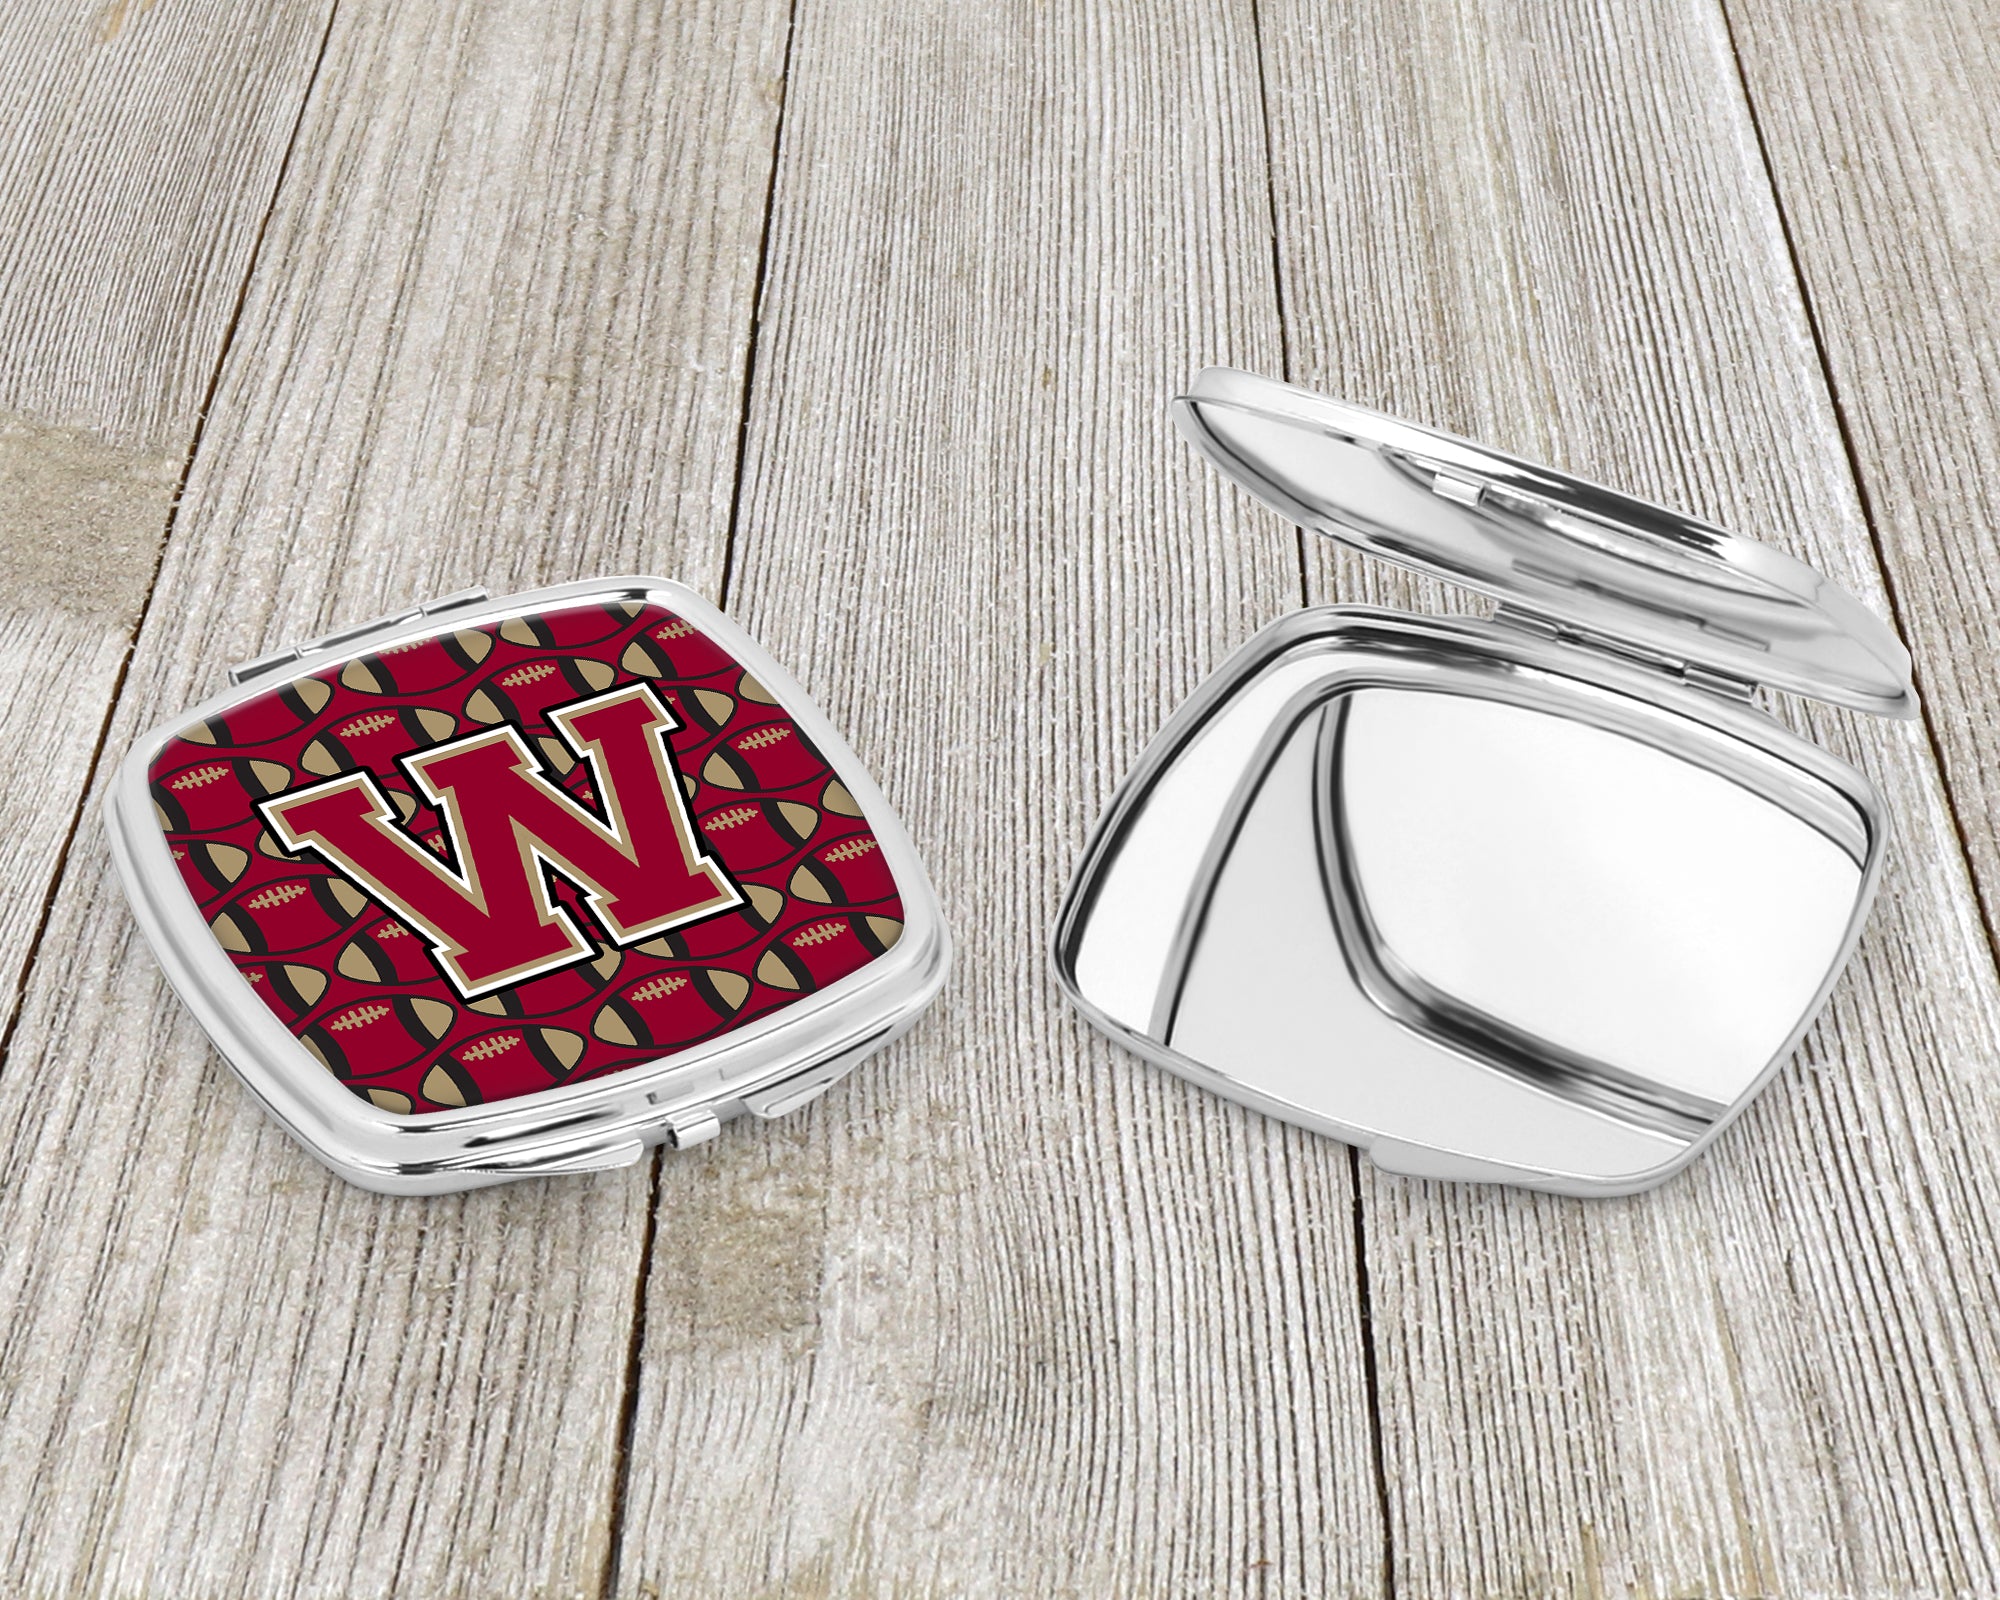 Letter W Football Garnet and Gold Compact Mirror CJ1078-WSCM  the-store.com.